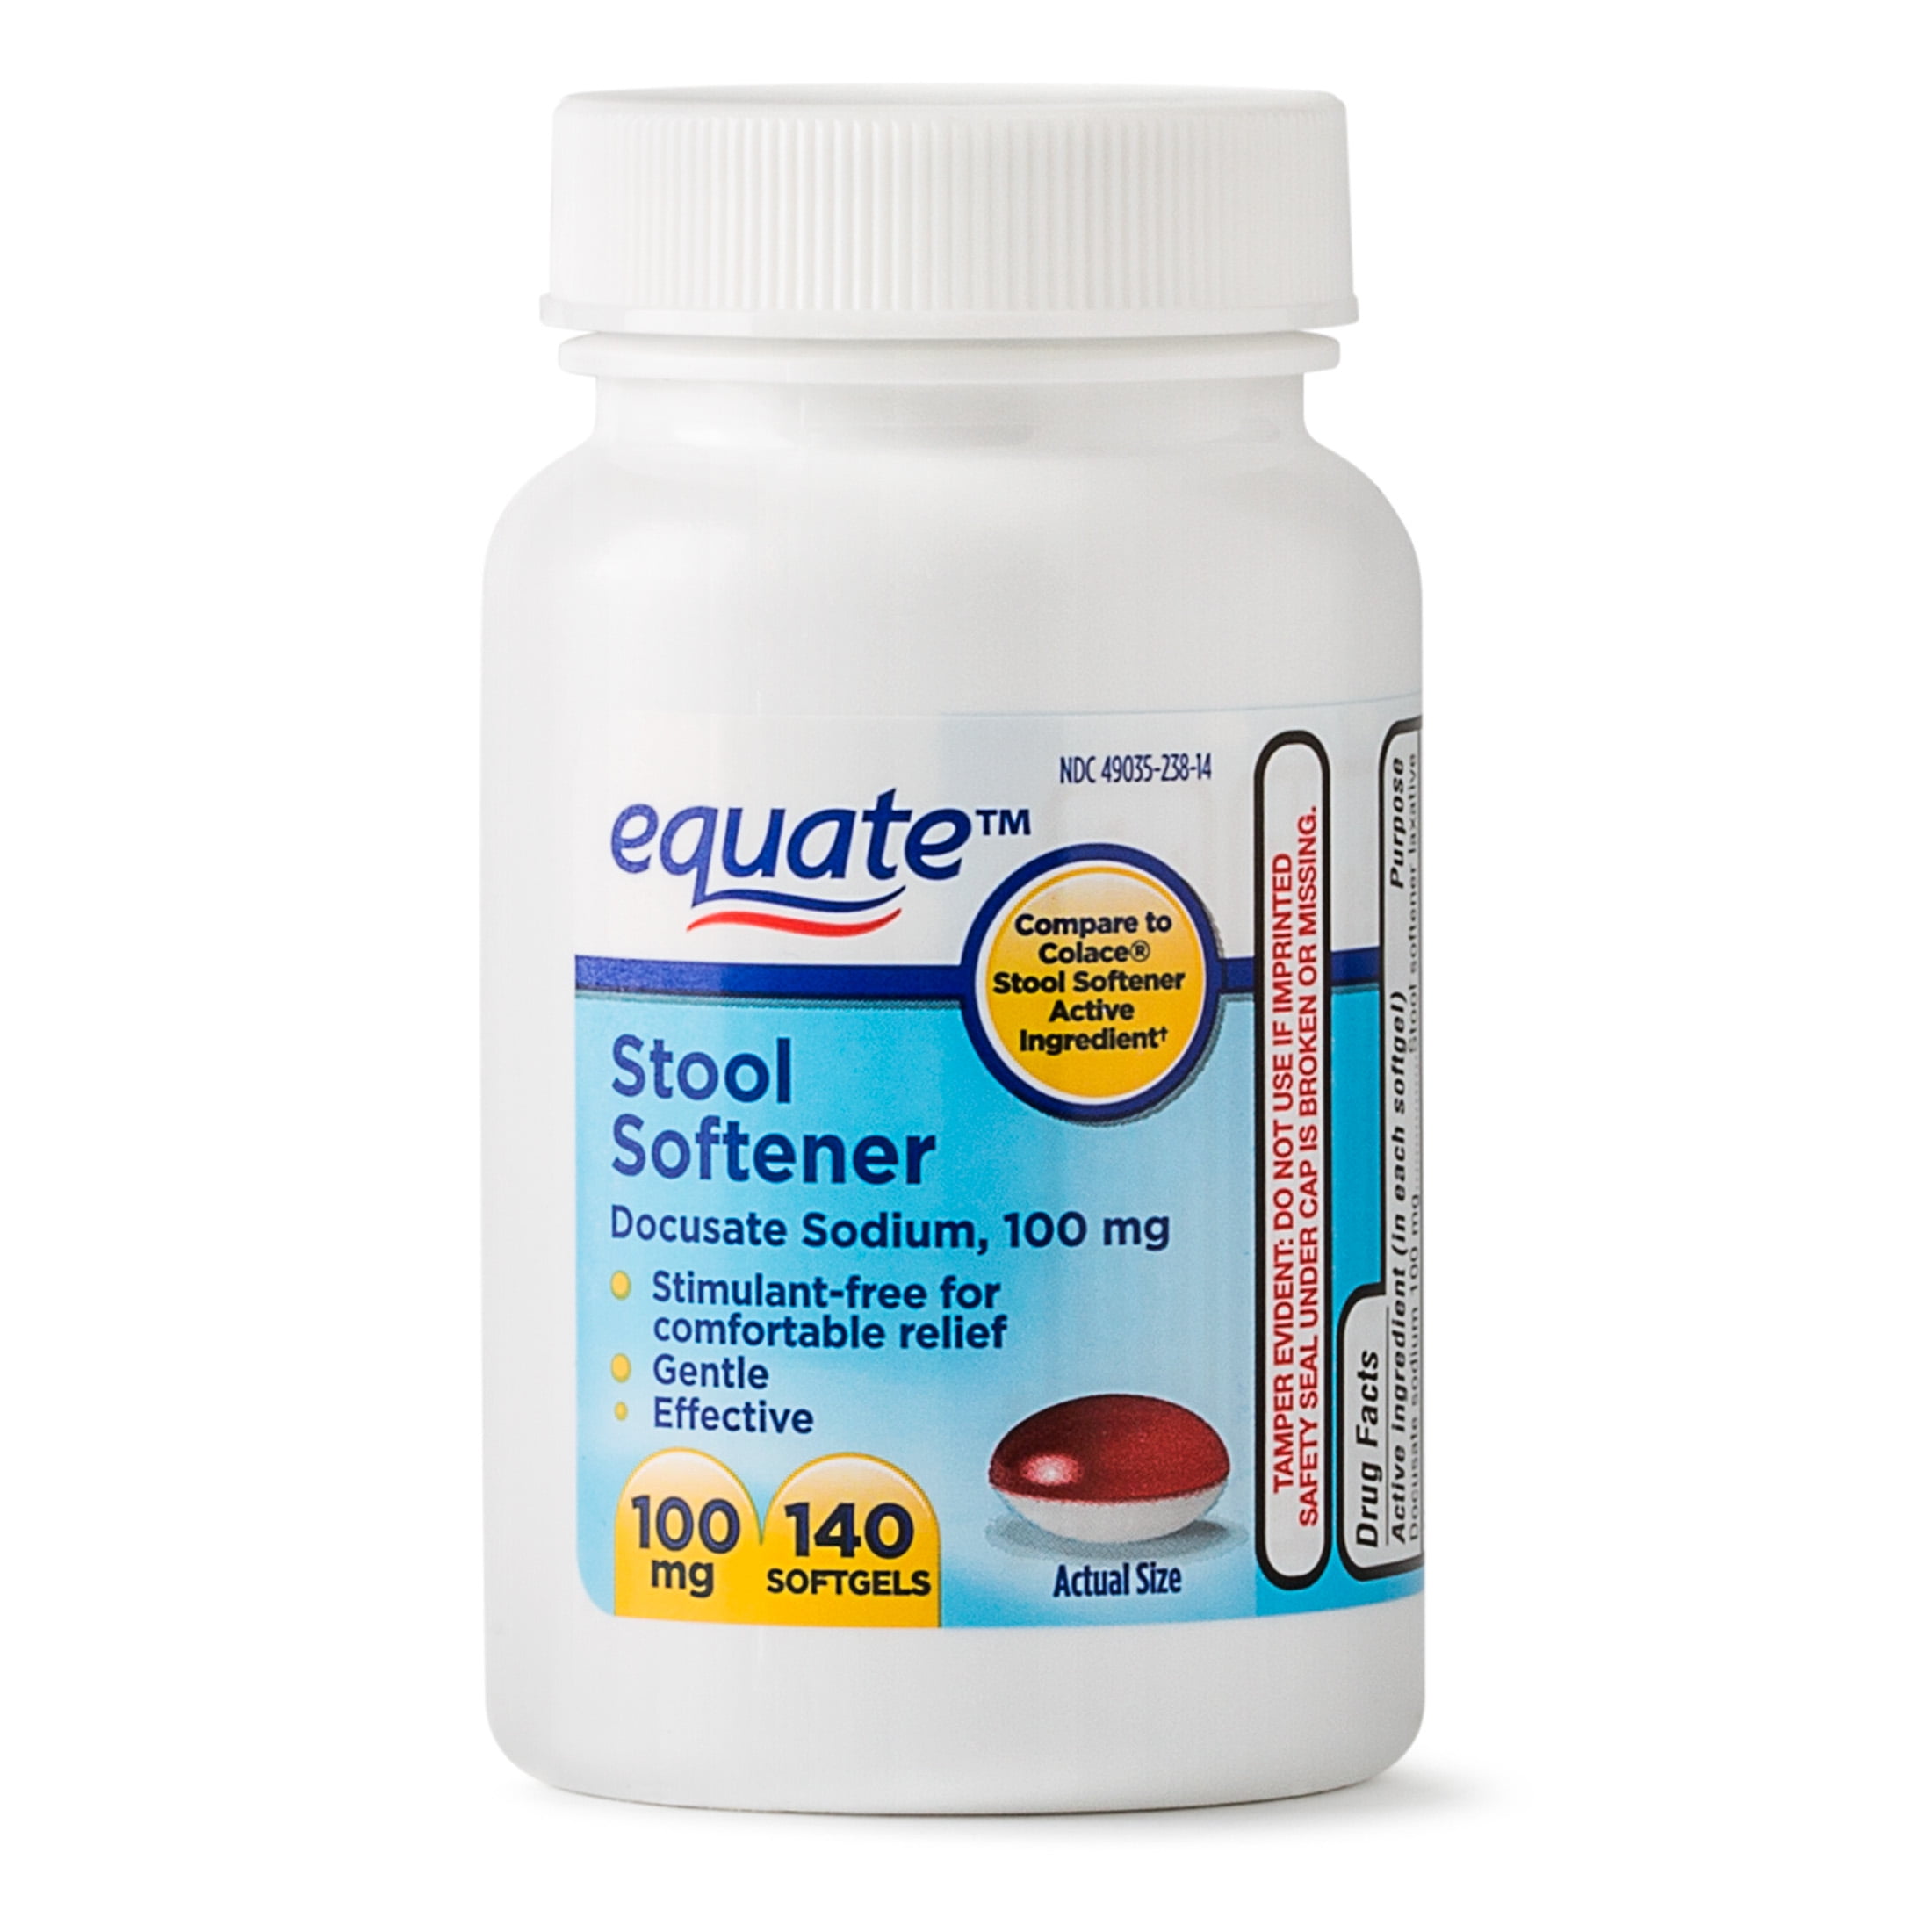 Equate Stool Softener Vs Colace